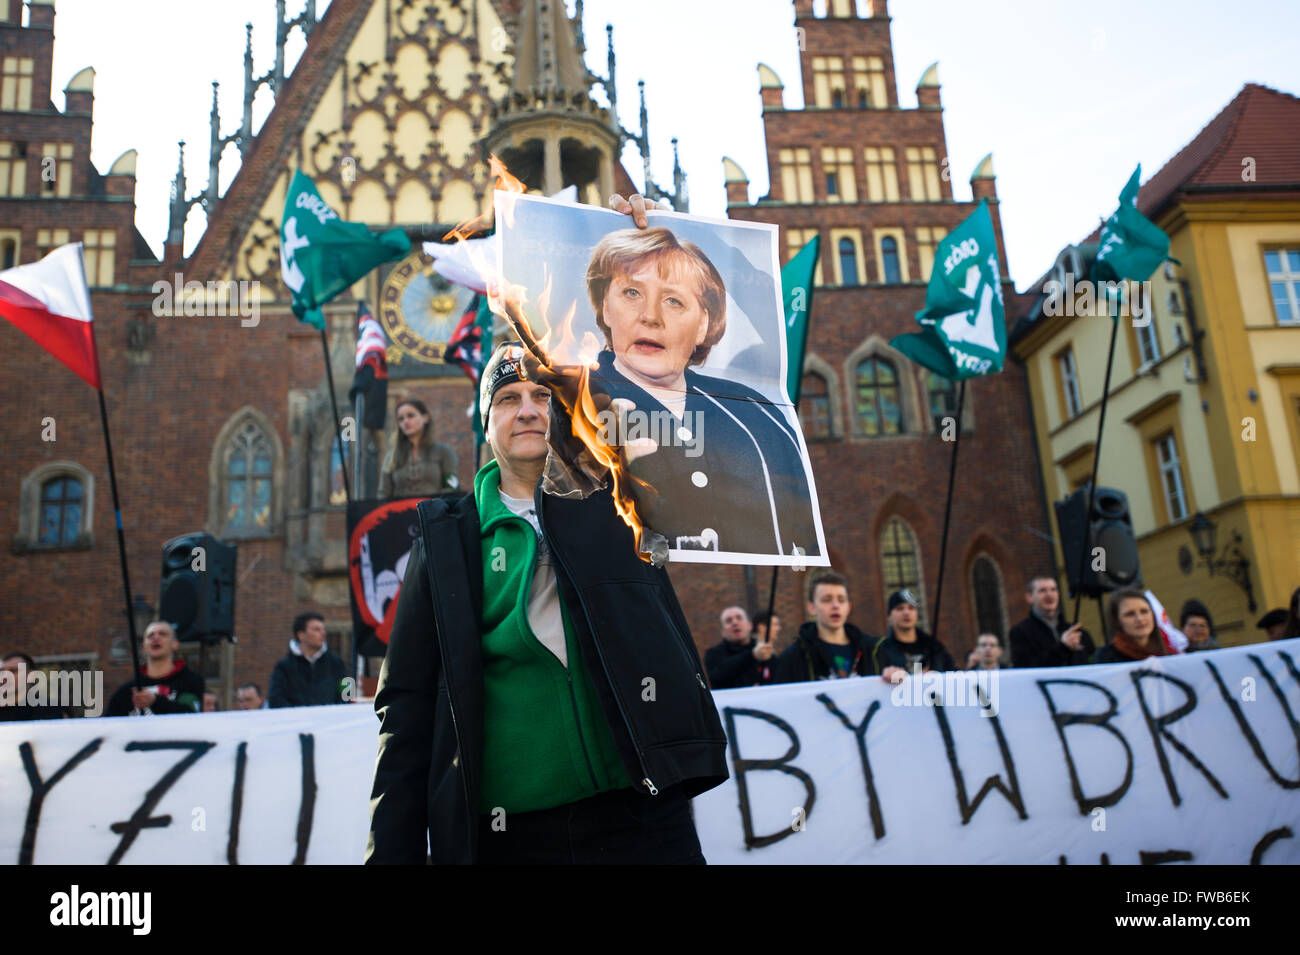 Wroclaw, Poland. 02nd Apr, 2016. Justyna Helcyk, Coordinator of ONR  (National Radical Camp)delivers a speech during anti immigrant and anti  Muslim protest organized by Oboz Narodowo-Radykalny (National Radical Camp)  in Wroclaw, western